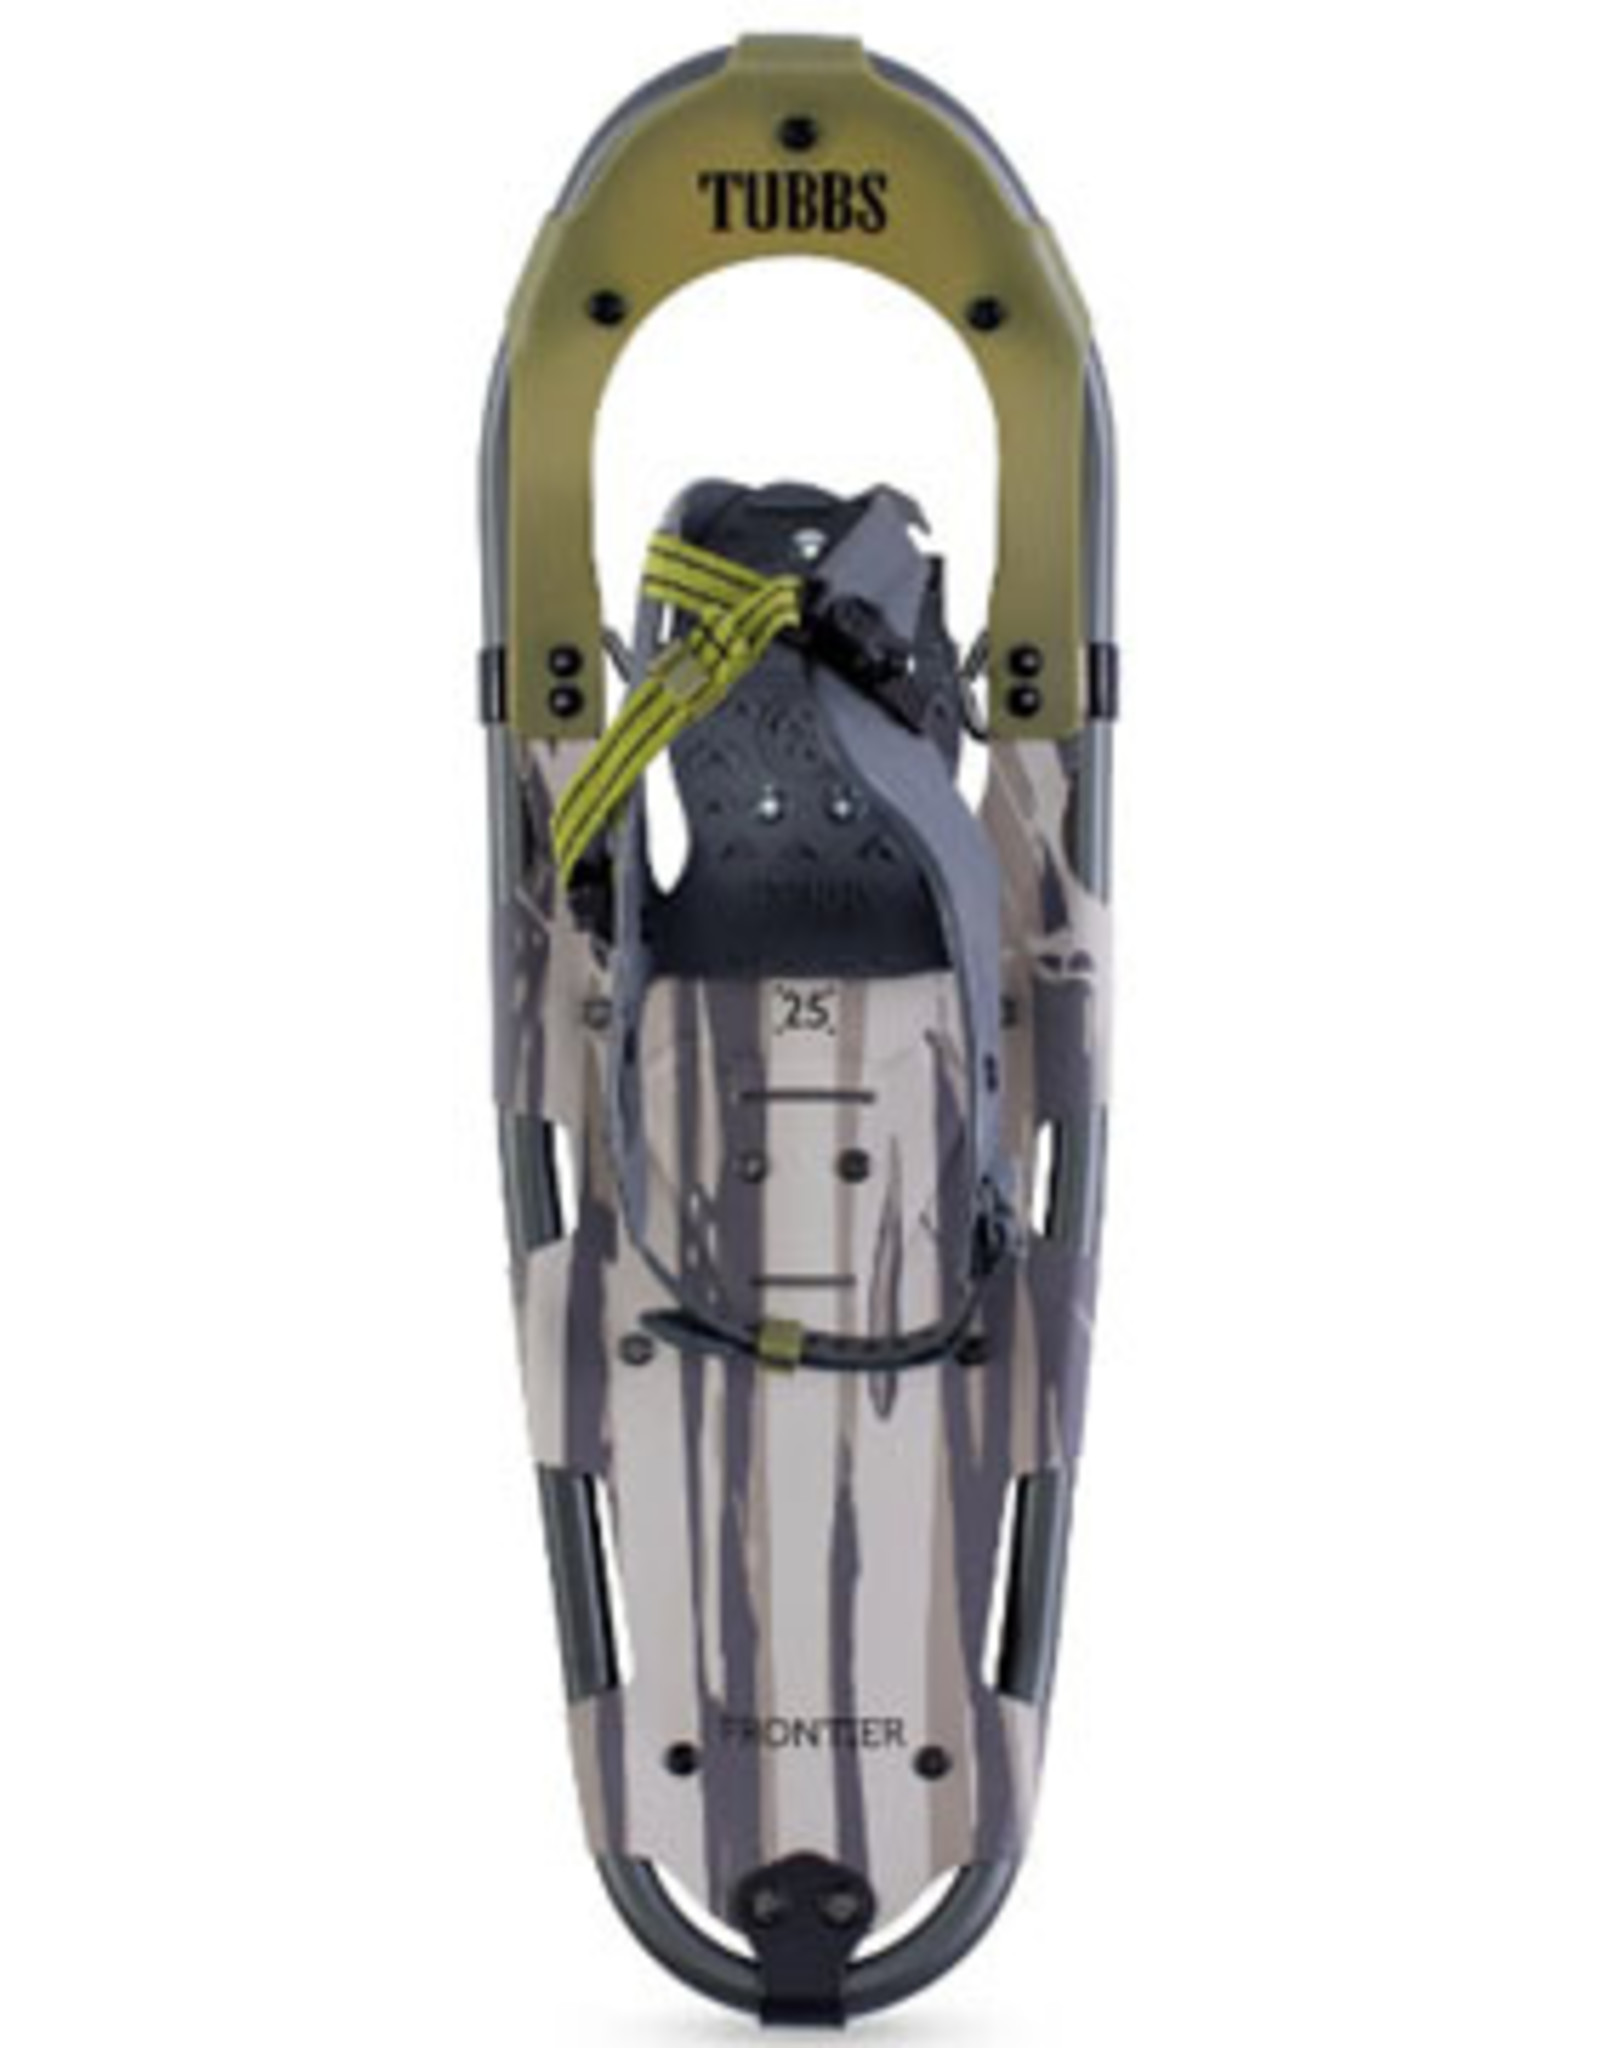 Tubbs Tubbs Frontier Men's Snowshoes Forest